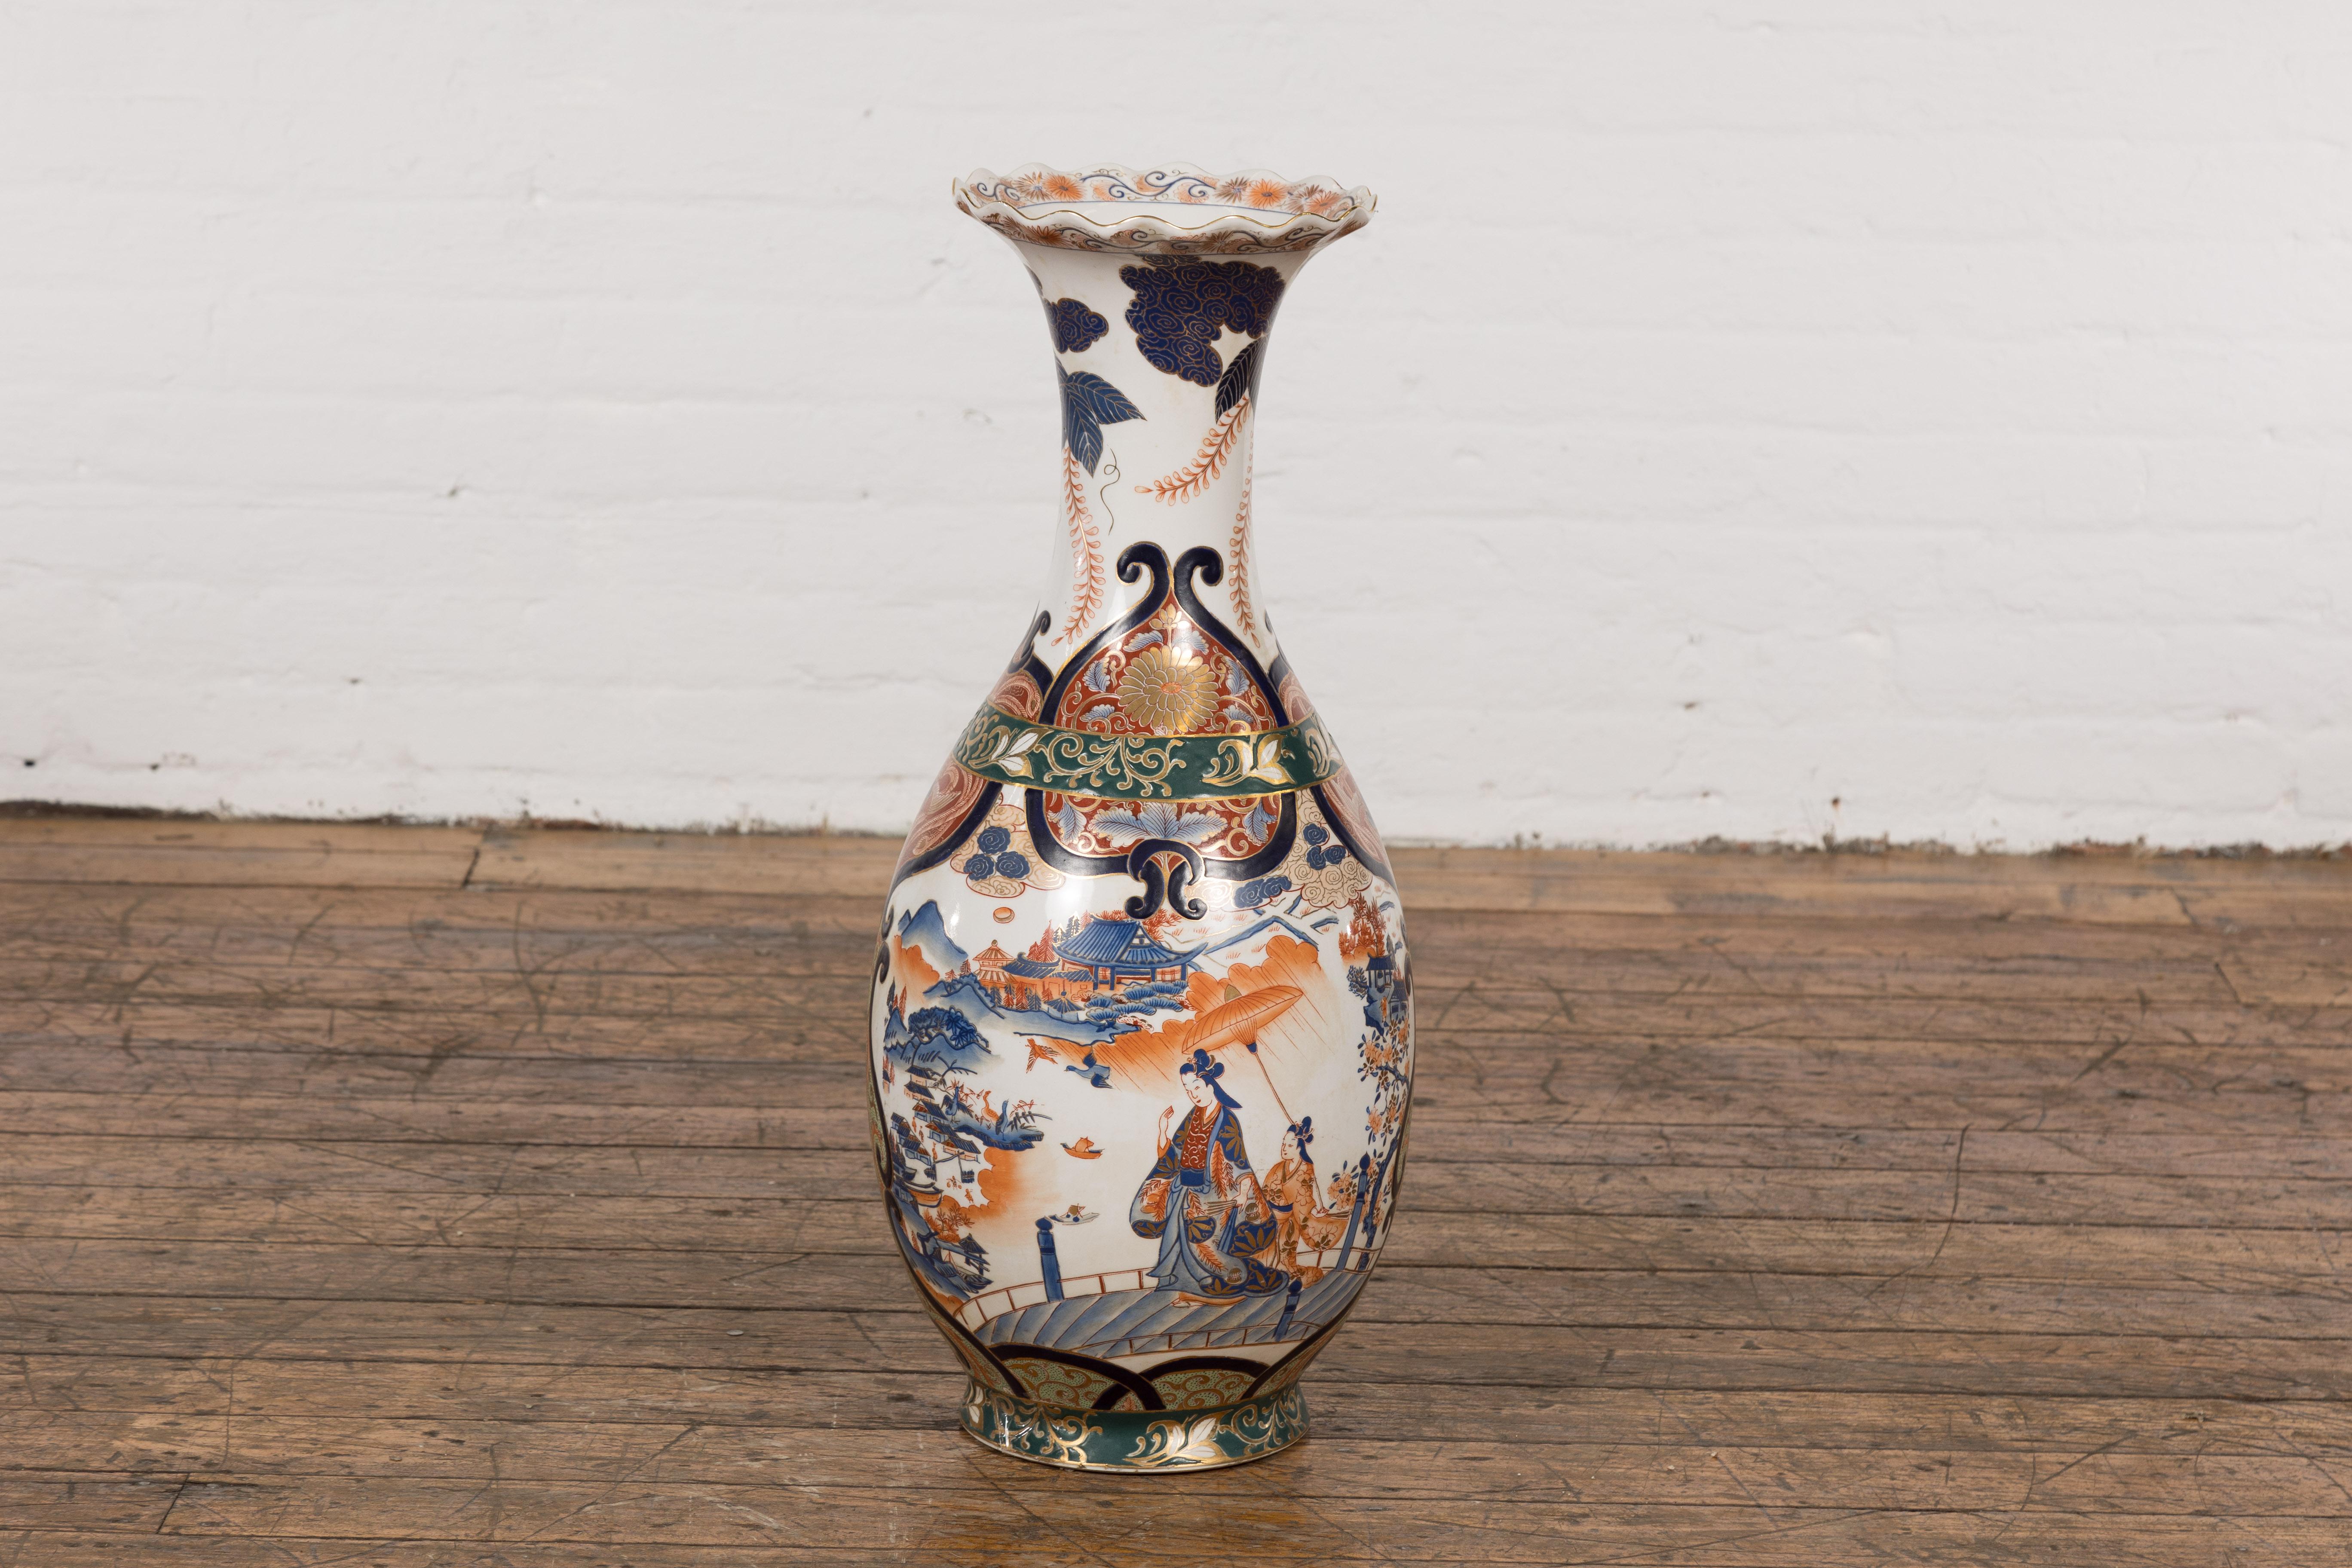 A Chinese Imari style vintage altar porcelain vase from the mid 20th century with blue underglaze, scalloped top, orange, blue and green décor as well as elegant ladies, architectures and landscape motifs. This Chinese Imari style vintage altar